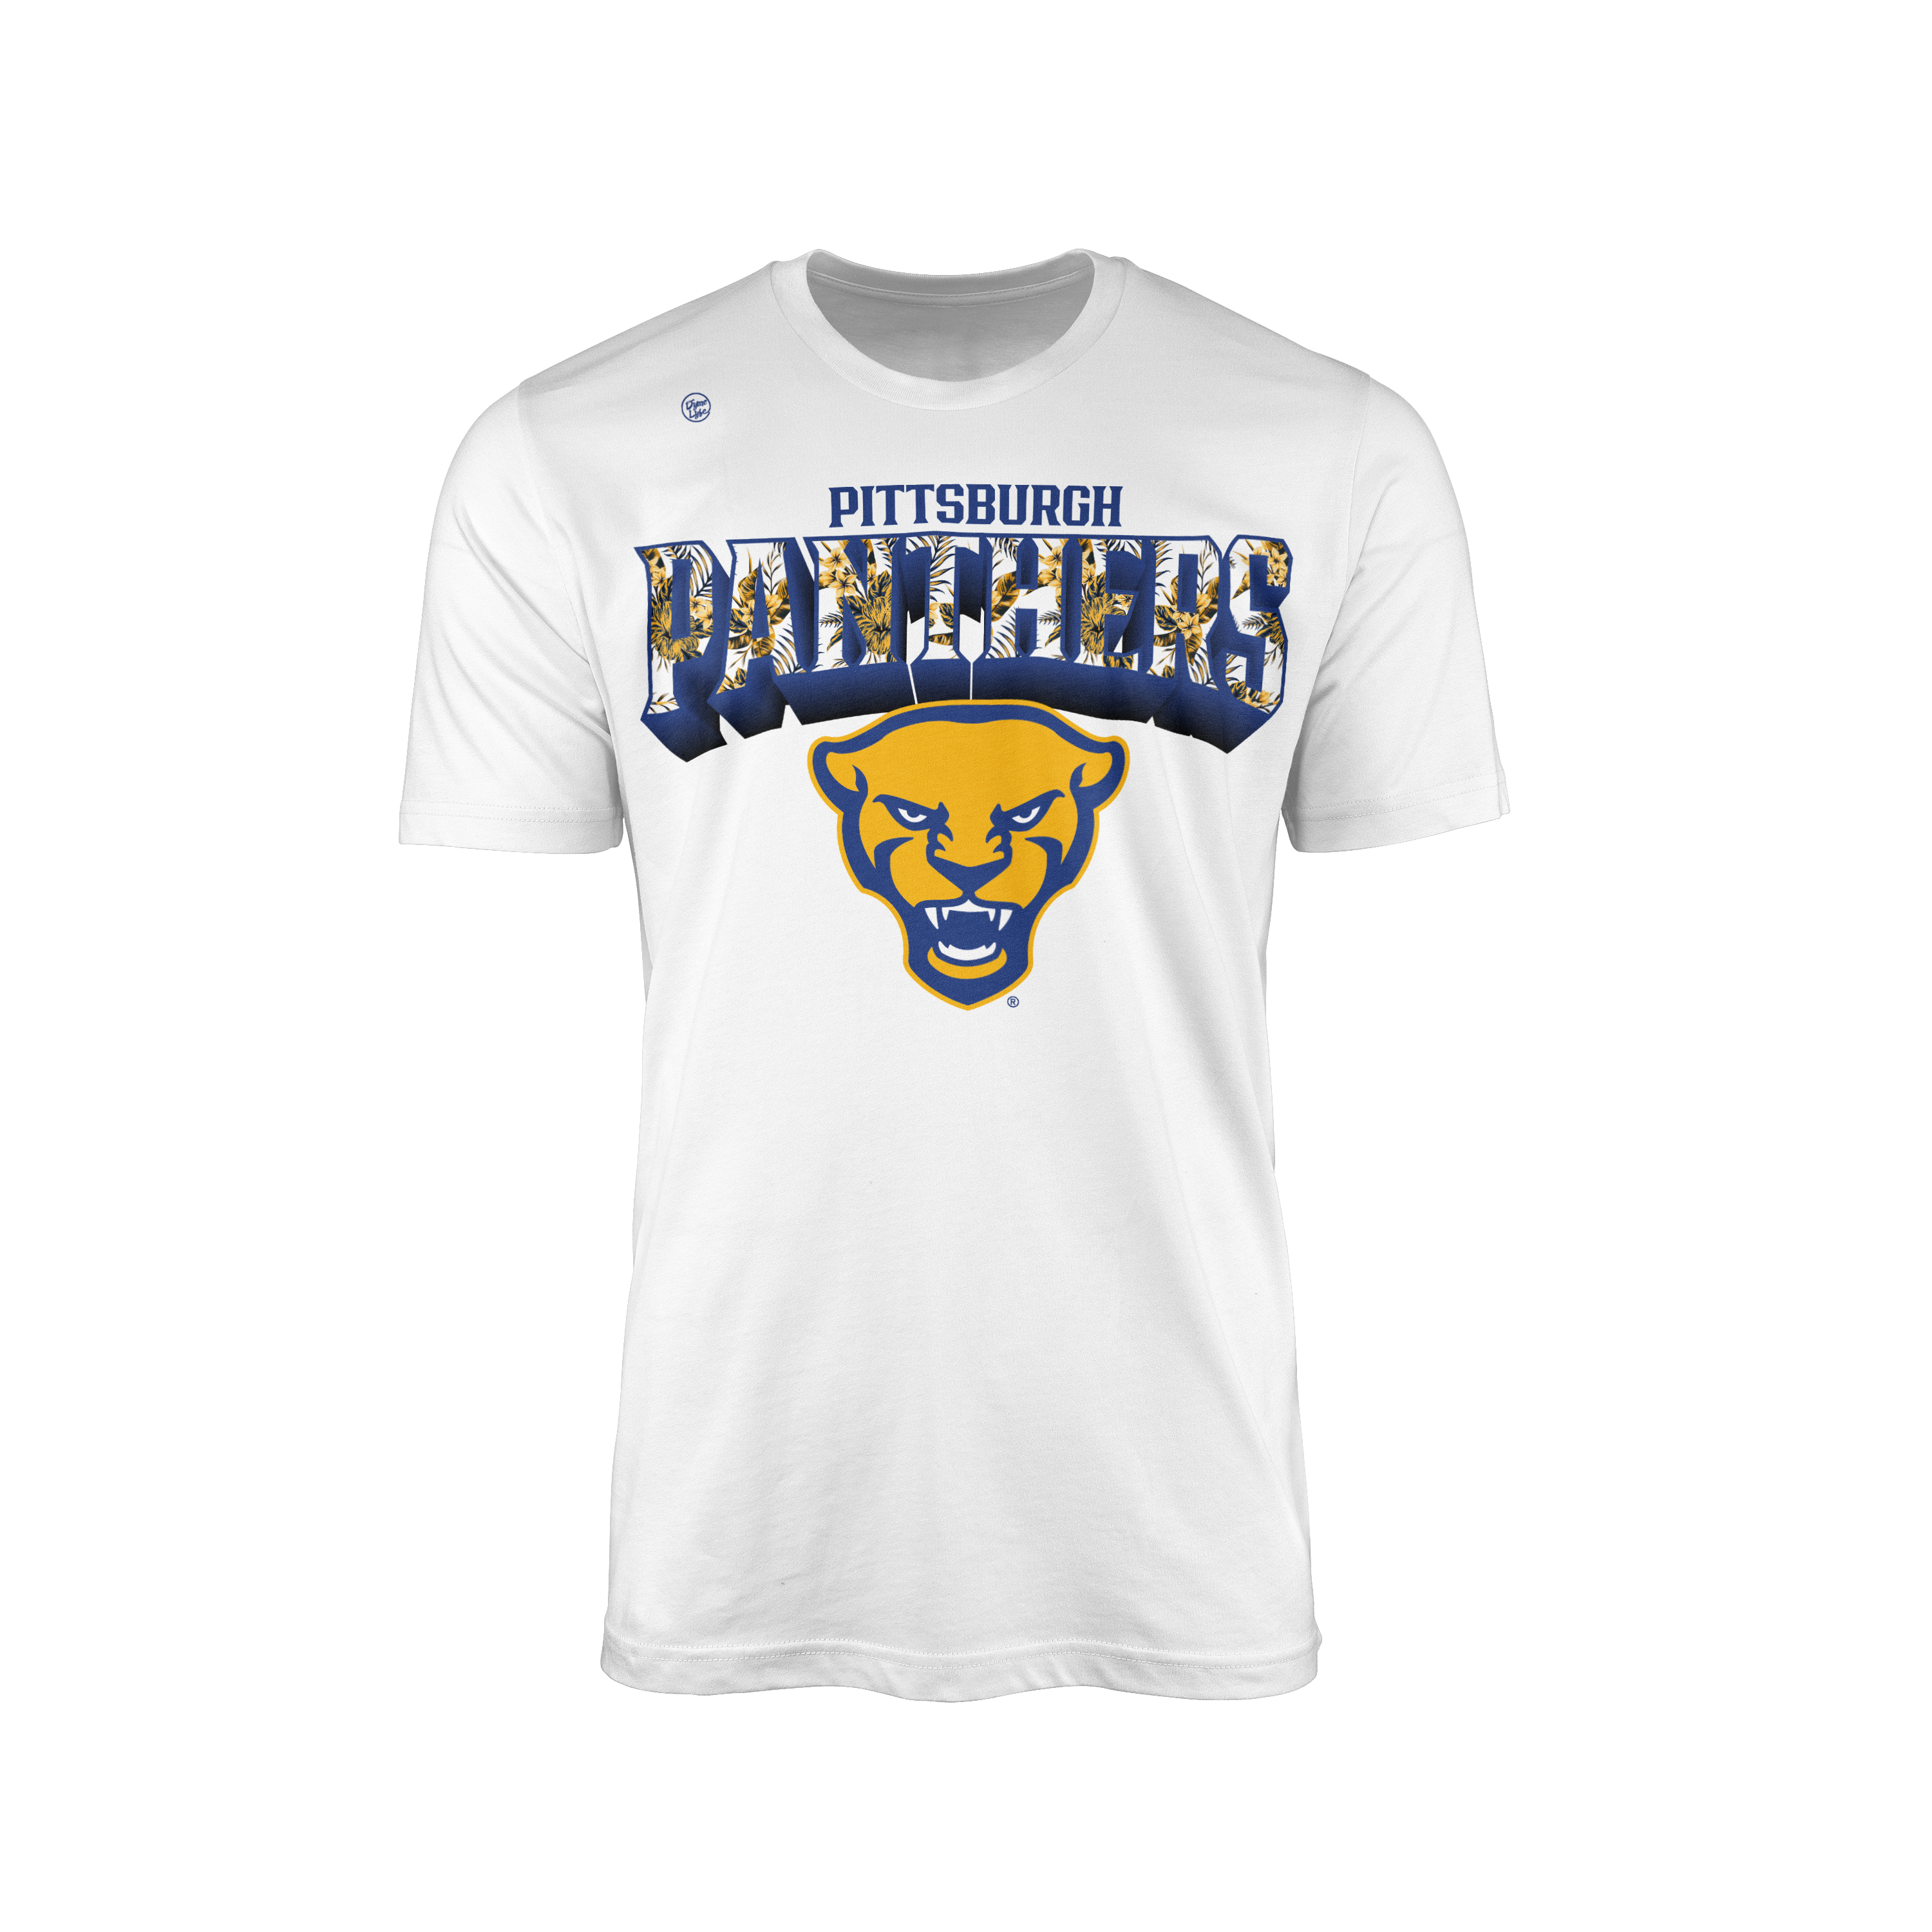 Pittsburgh Panthers Men’s Floral Team Tee